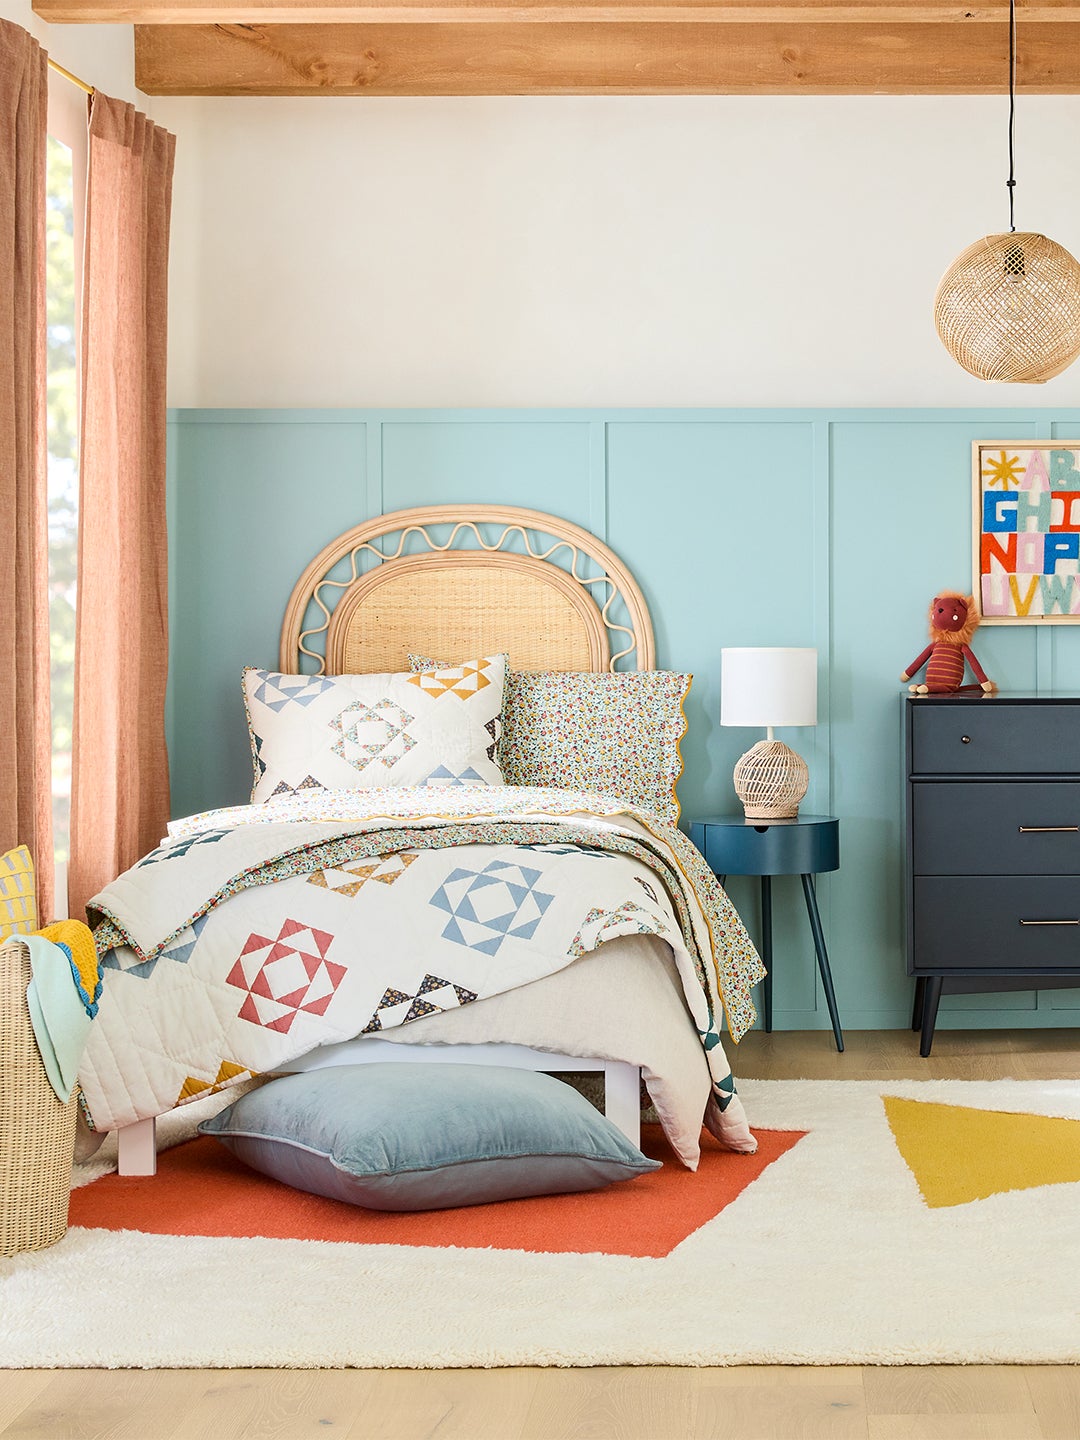 We Not So Secretly Want West Elm Kids's New Toy Baskets for Closet Organization